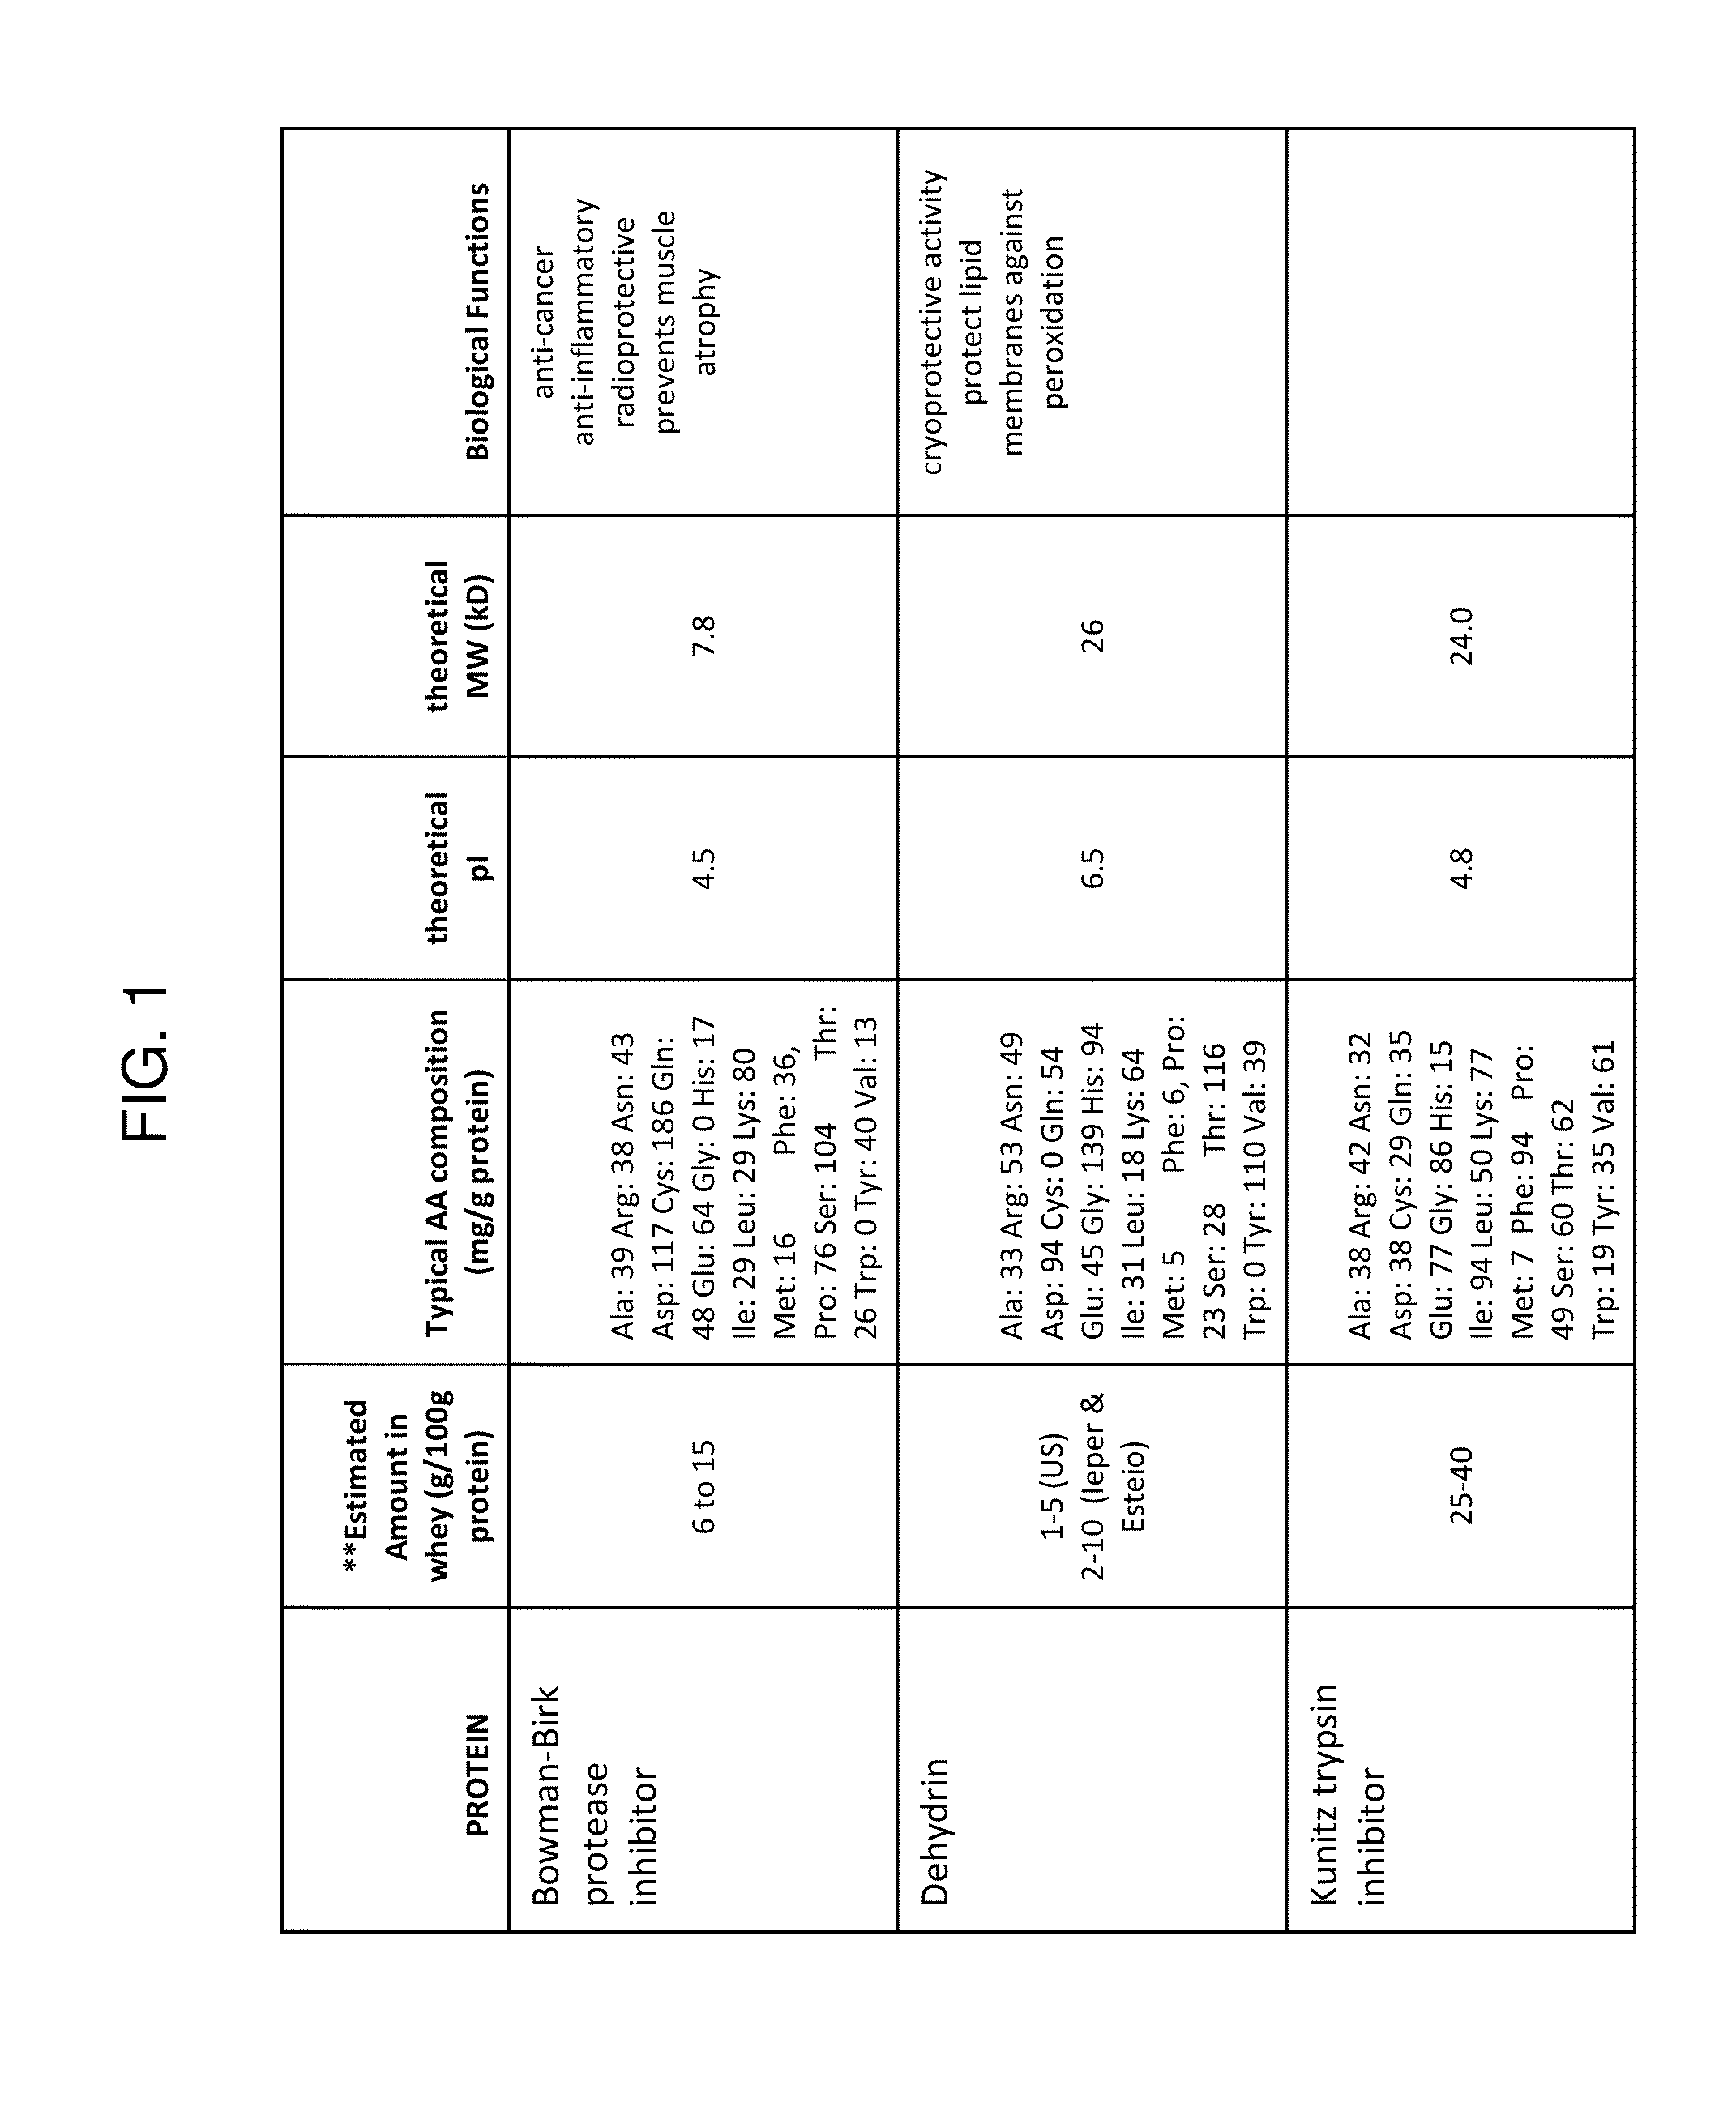 Emulsifying agent for use in personal care products and industrial products